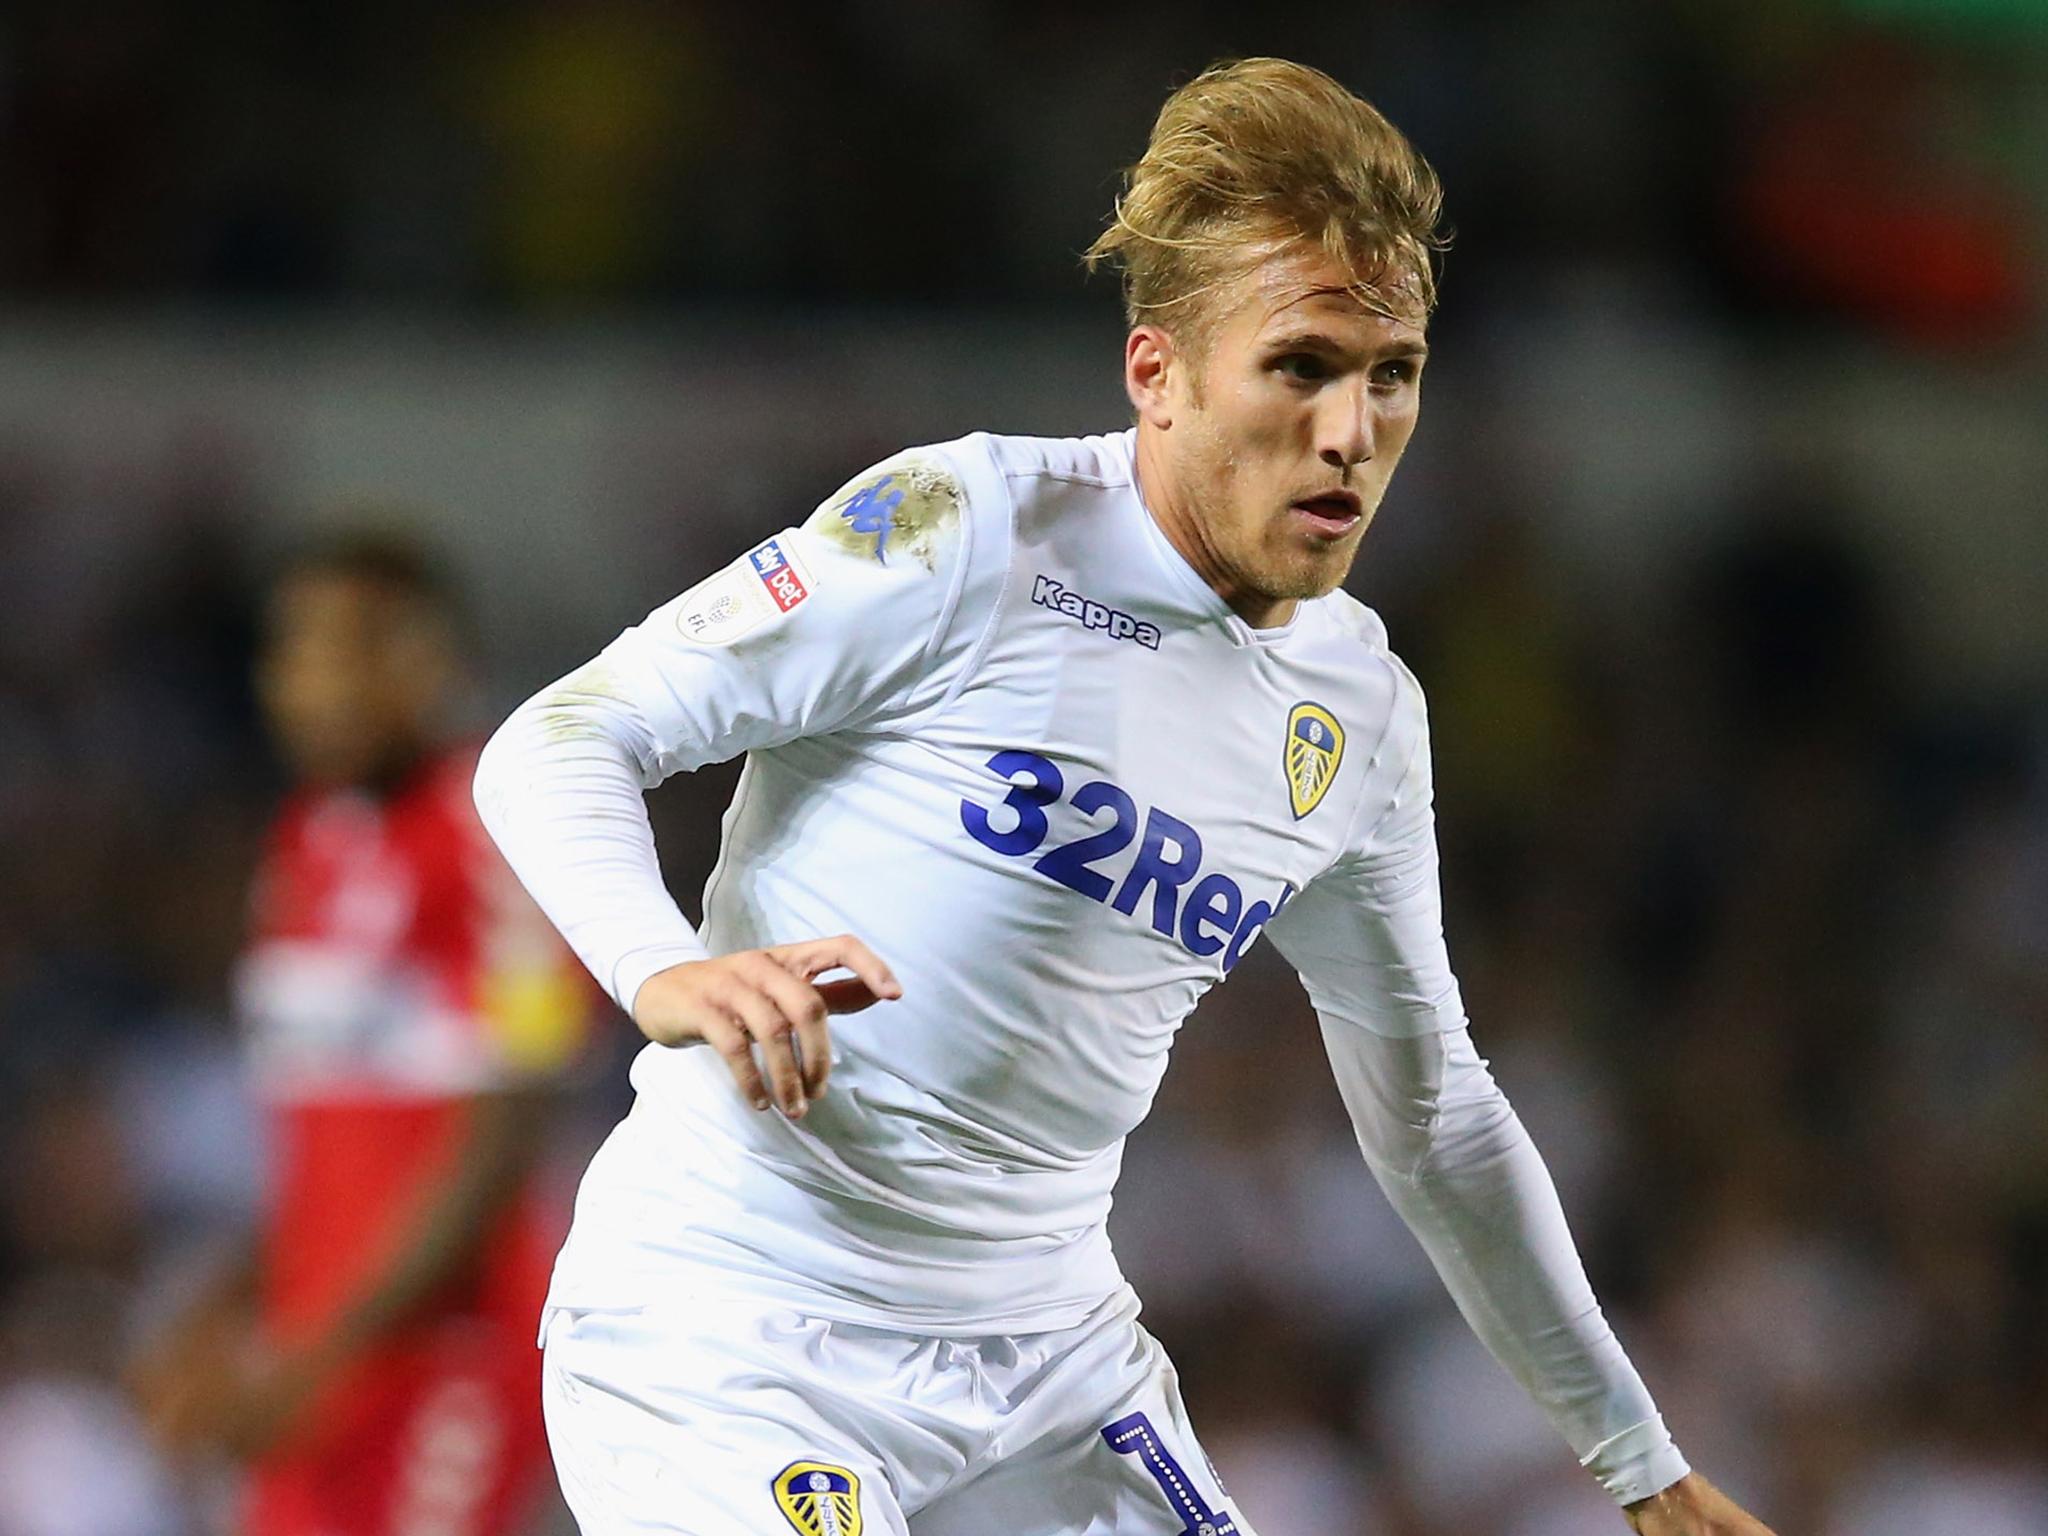 Leeds United forward Samuel Saiz has been arrested as part of a match-fixing investigation in Spain